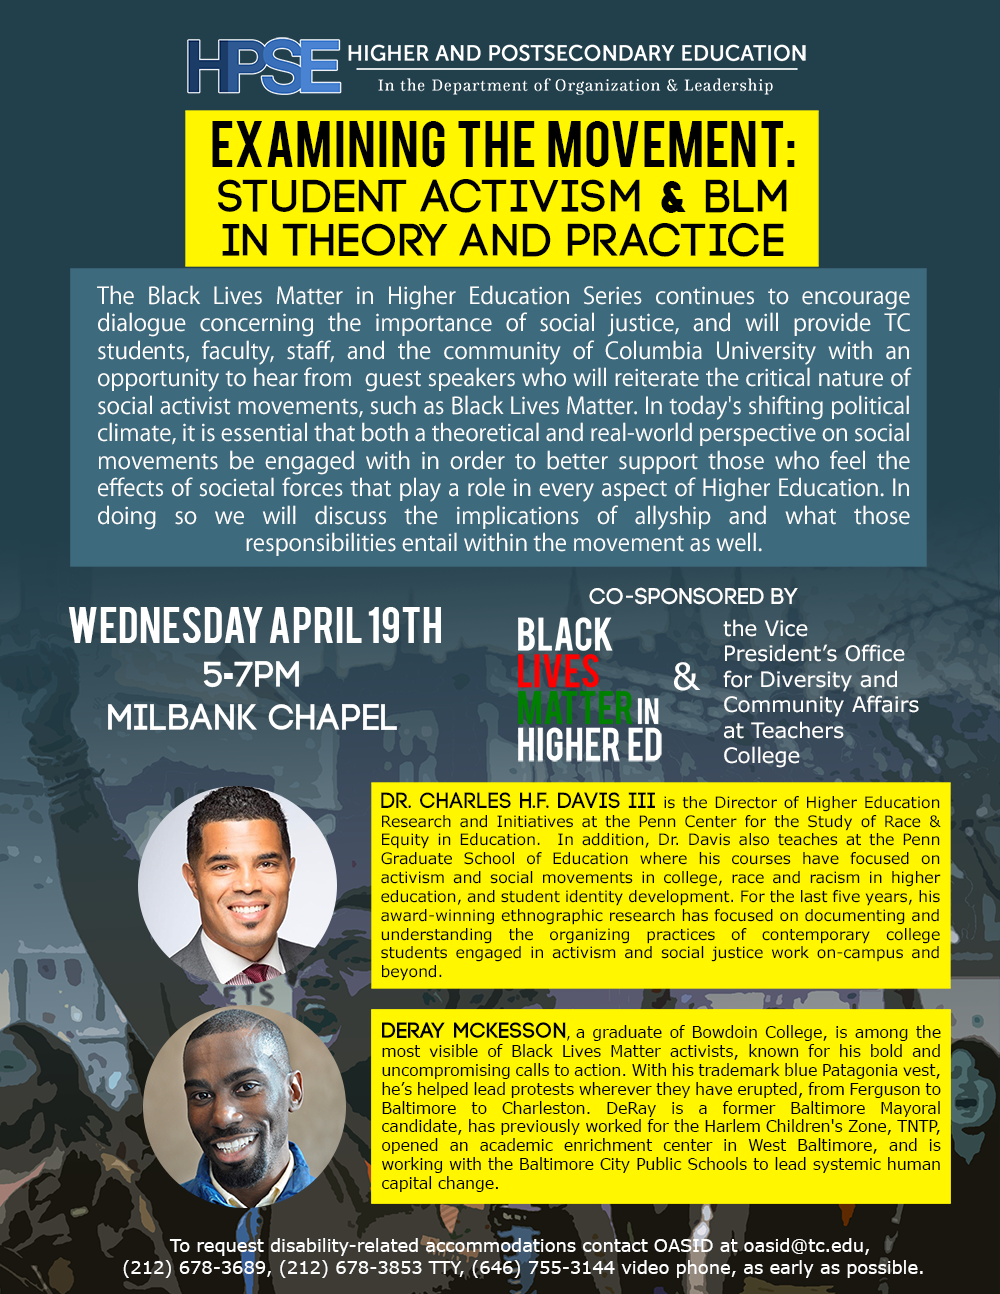 Black Lives Matter in Higher Ed Examining the Movement - Student Activism